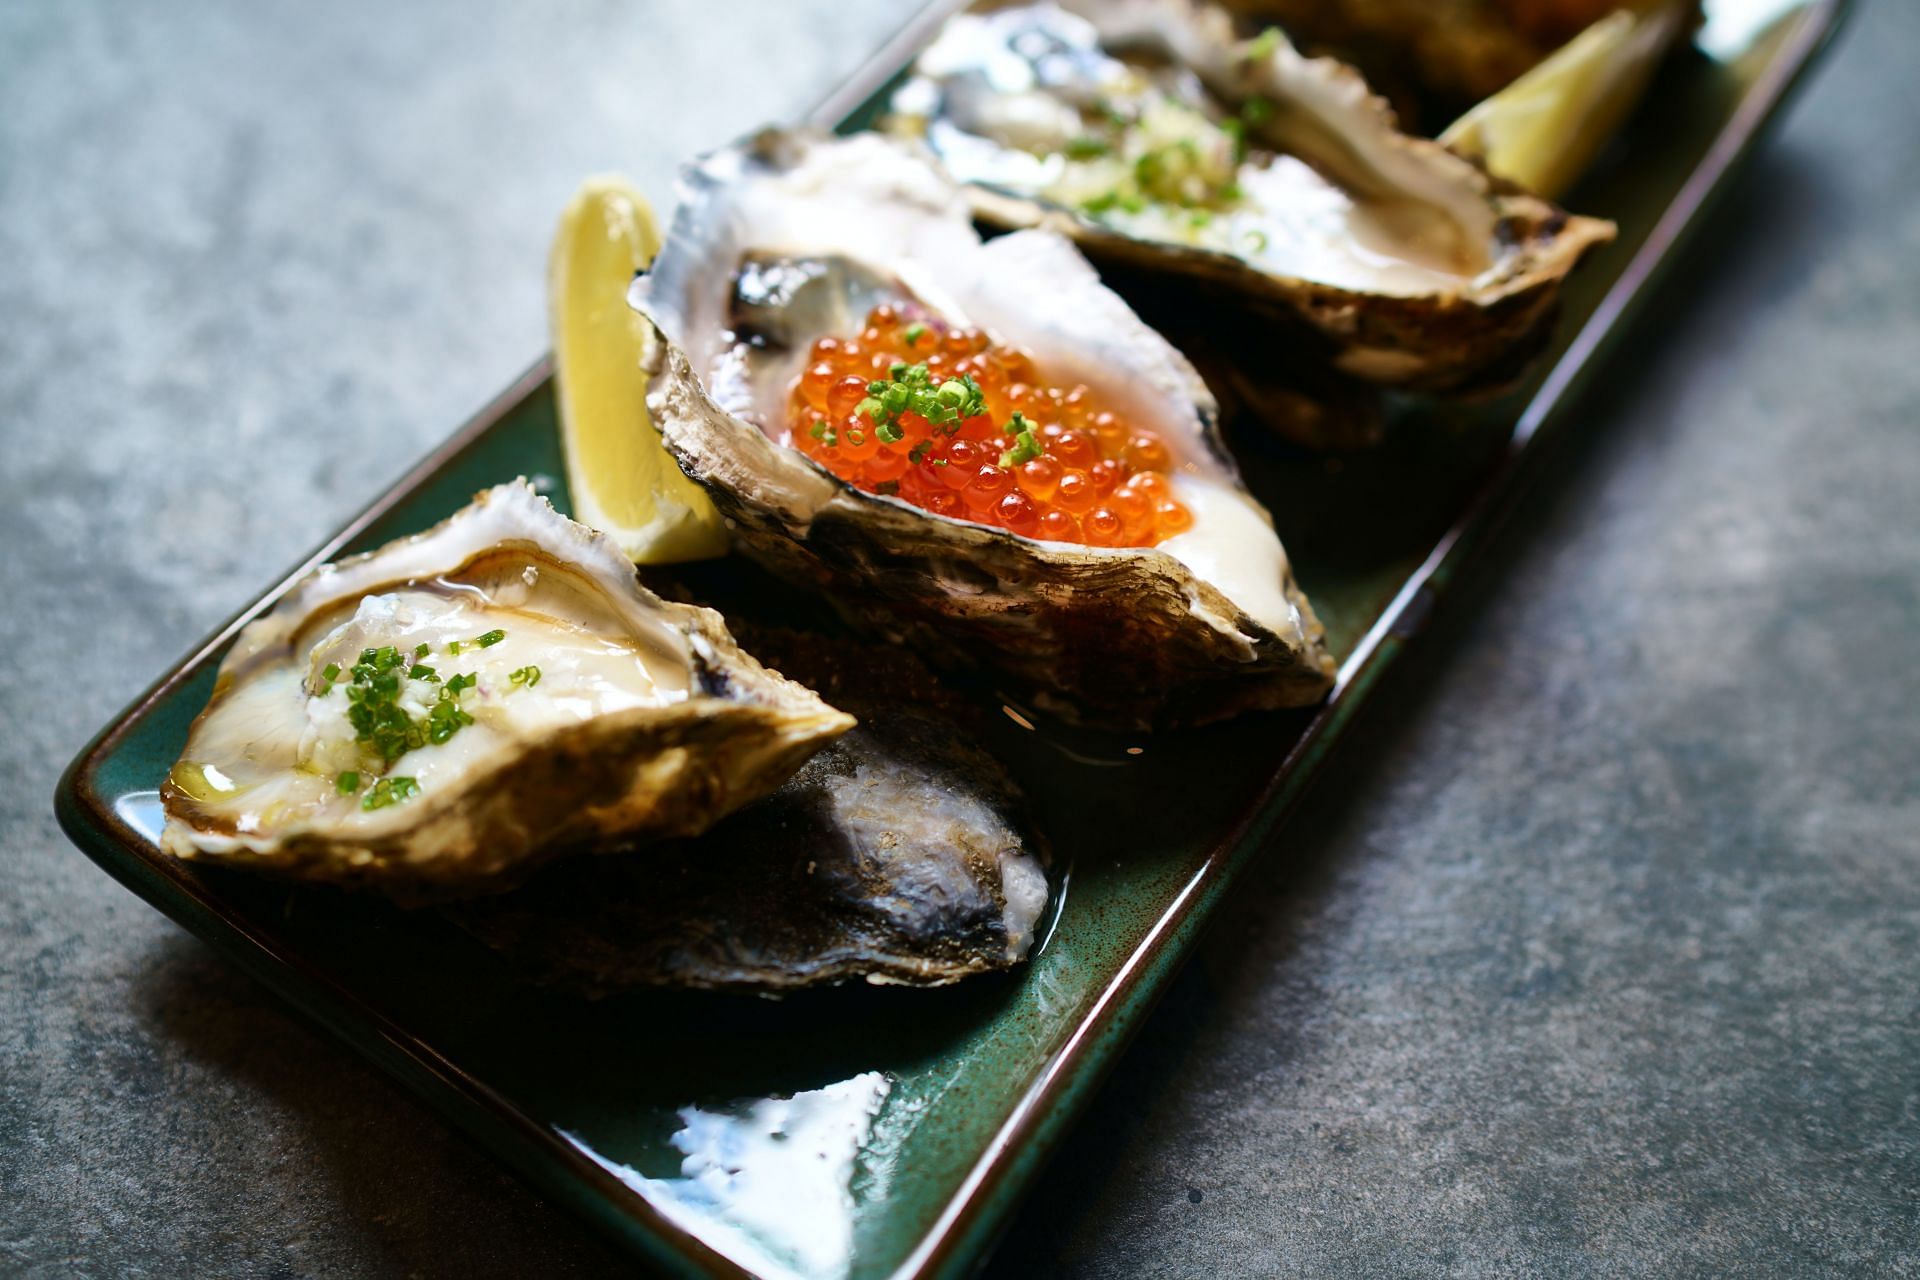 Oysters can be eaten raw or cooked. (Image via Unsplash/Bruce Chapman)